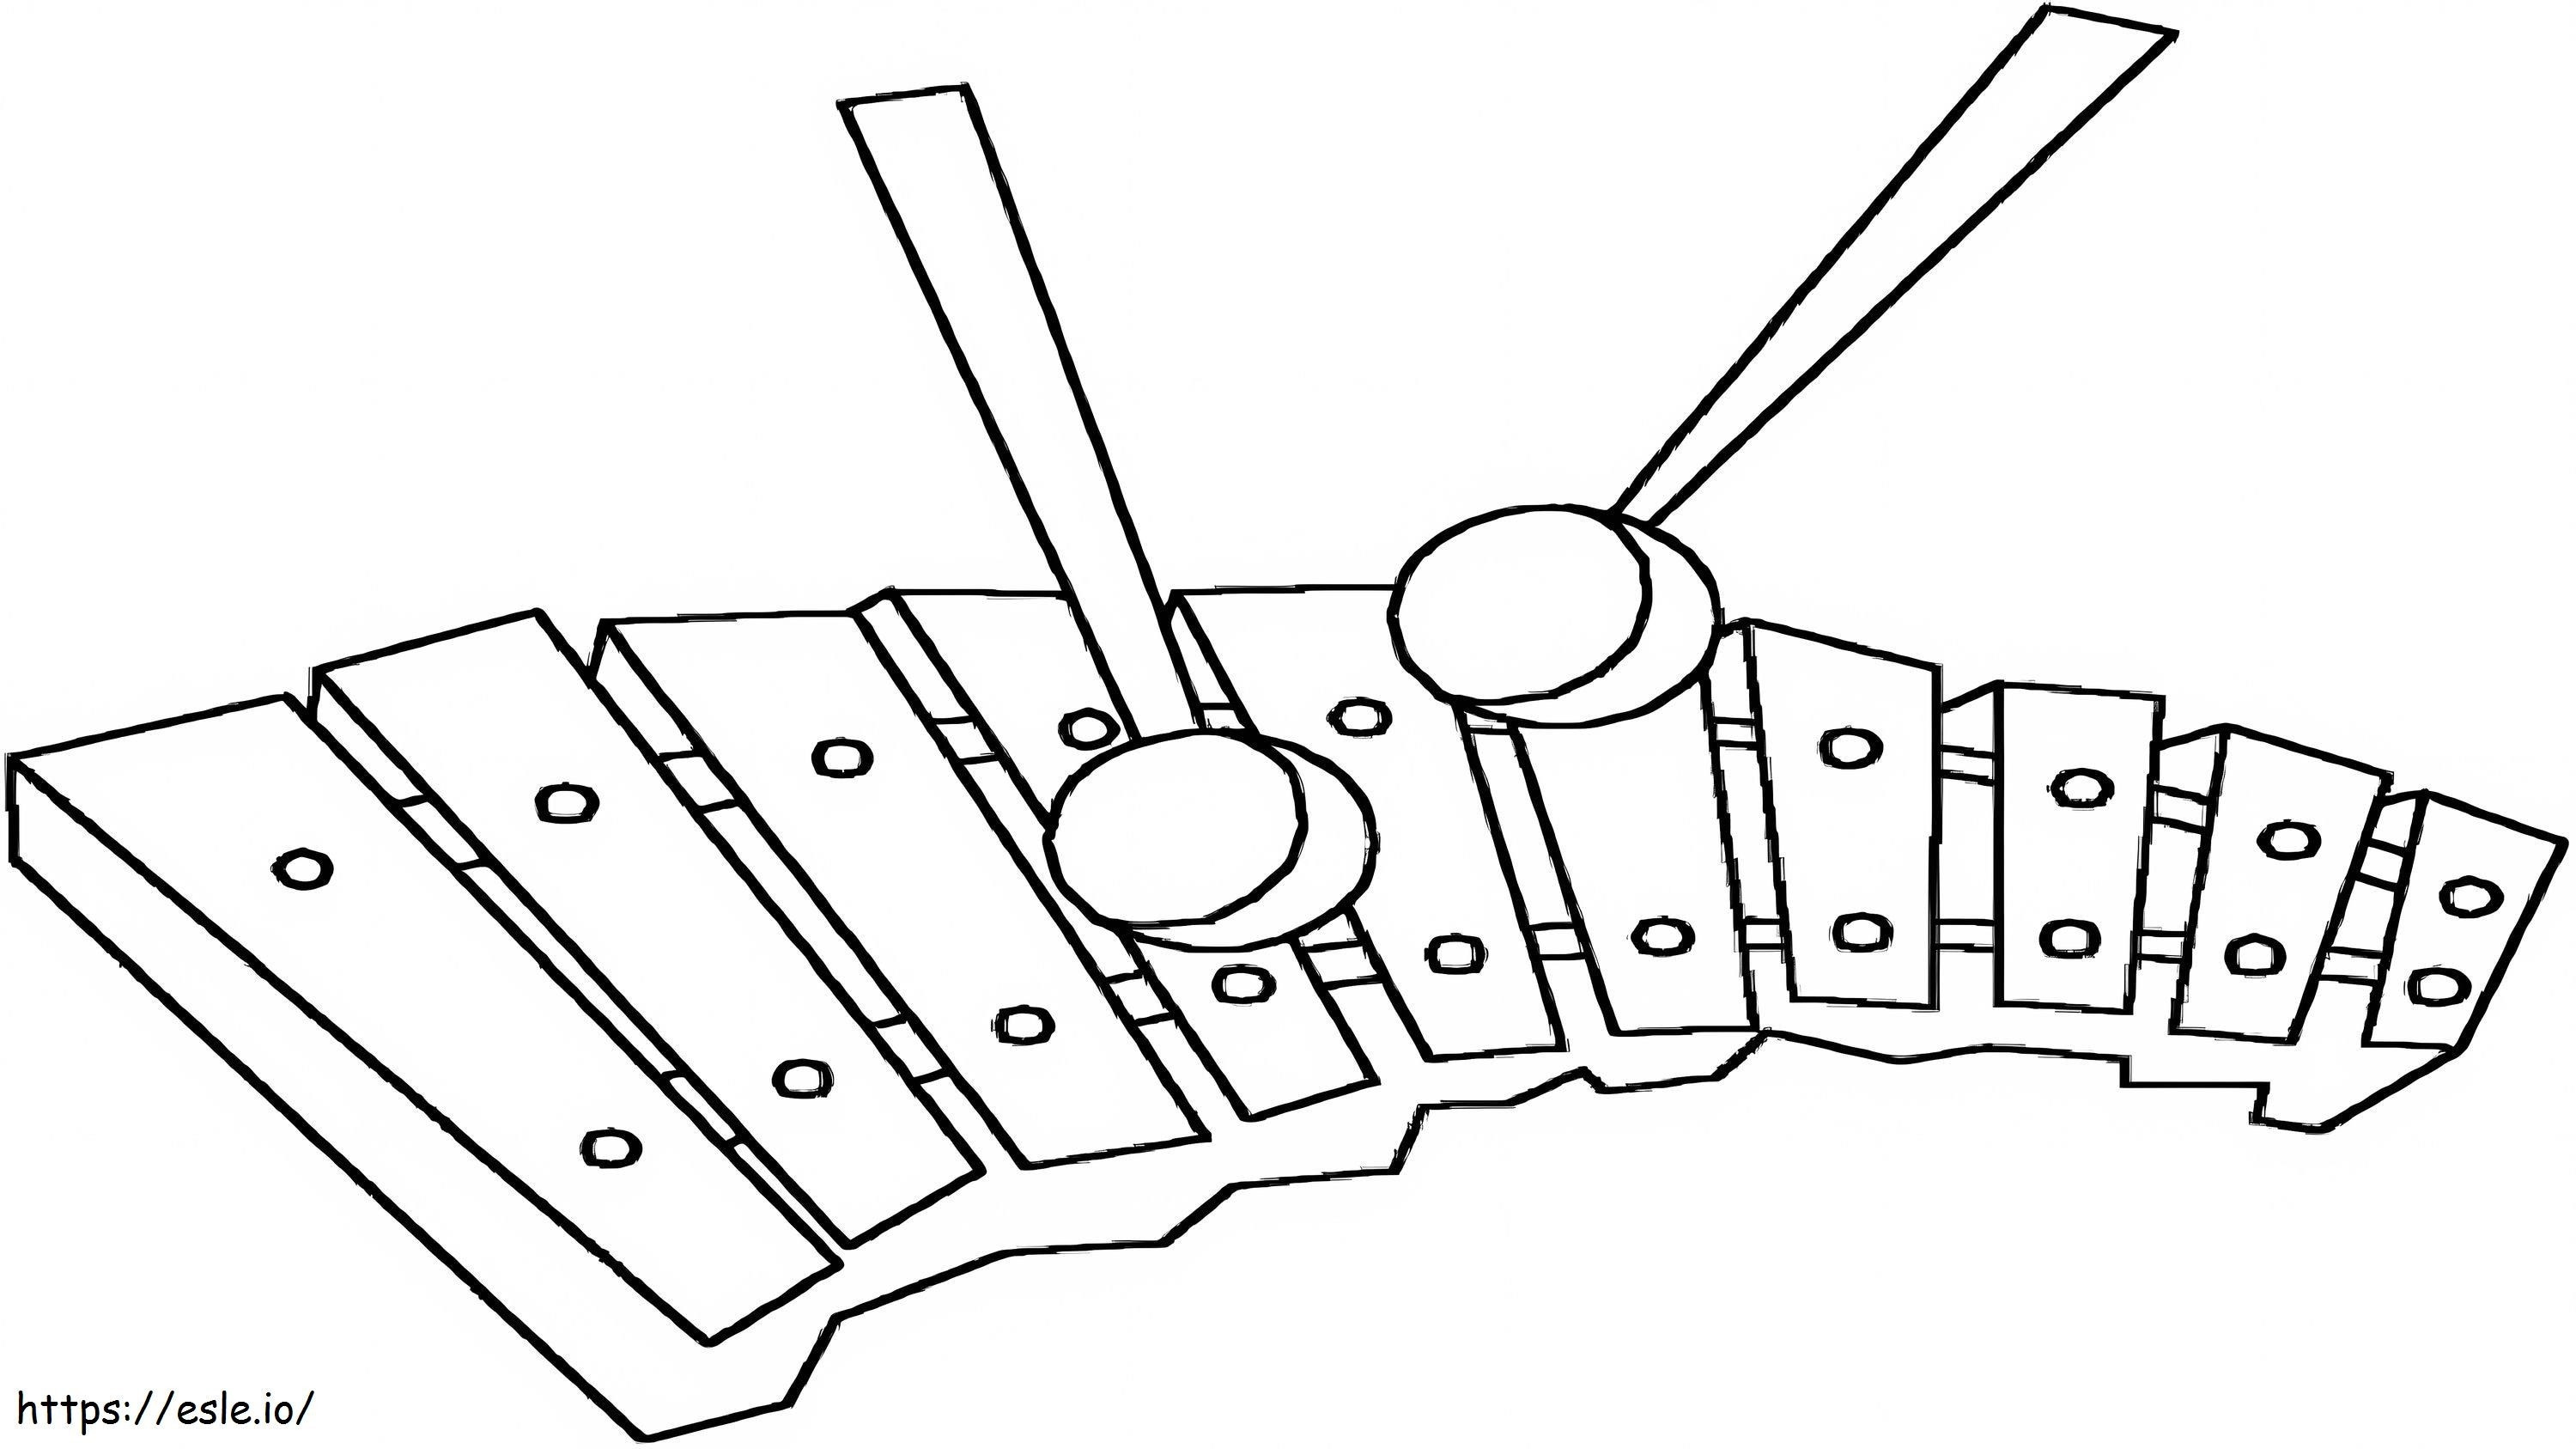 Simple Xylophone 2 coloring page